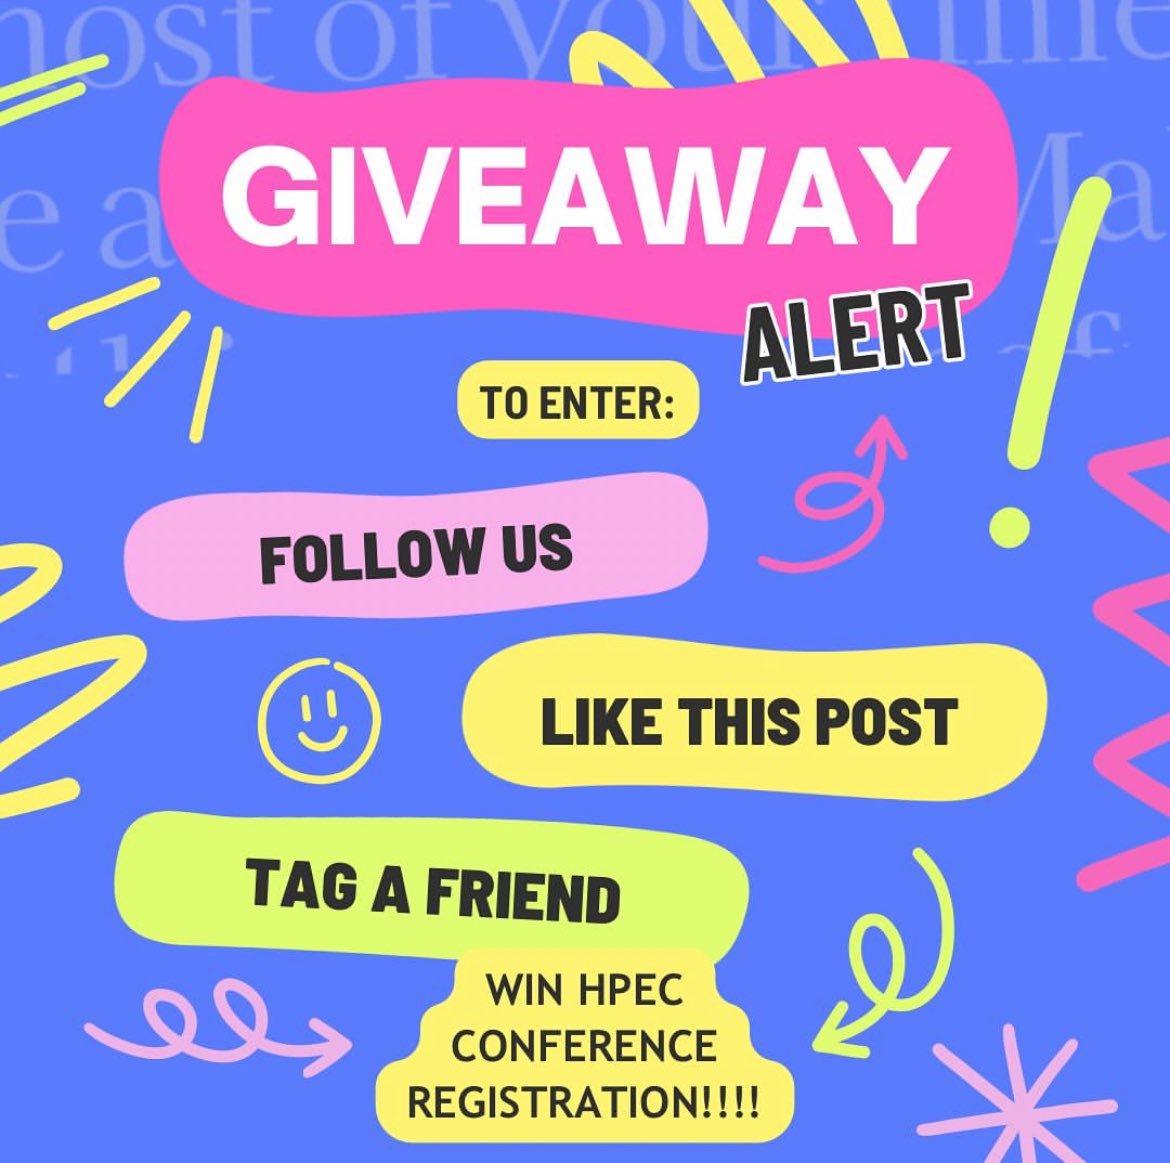 Don’t miss your chance to WIN!!! Follow the 3 steps listed in our post to be entered in our draw for FREE HPEC Conference registration! The winner will be announced tomorrow!!! Good luck!! 🤞 🤞 @abteachers